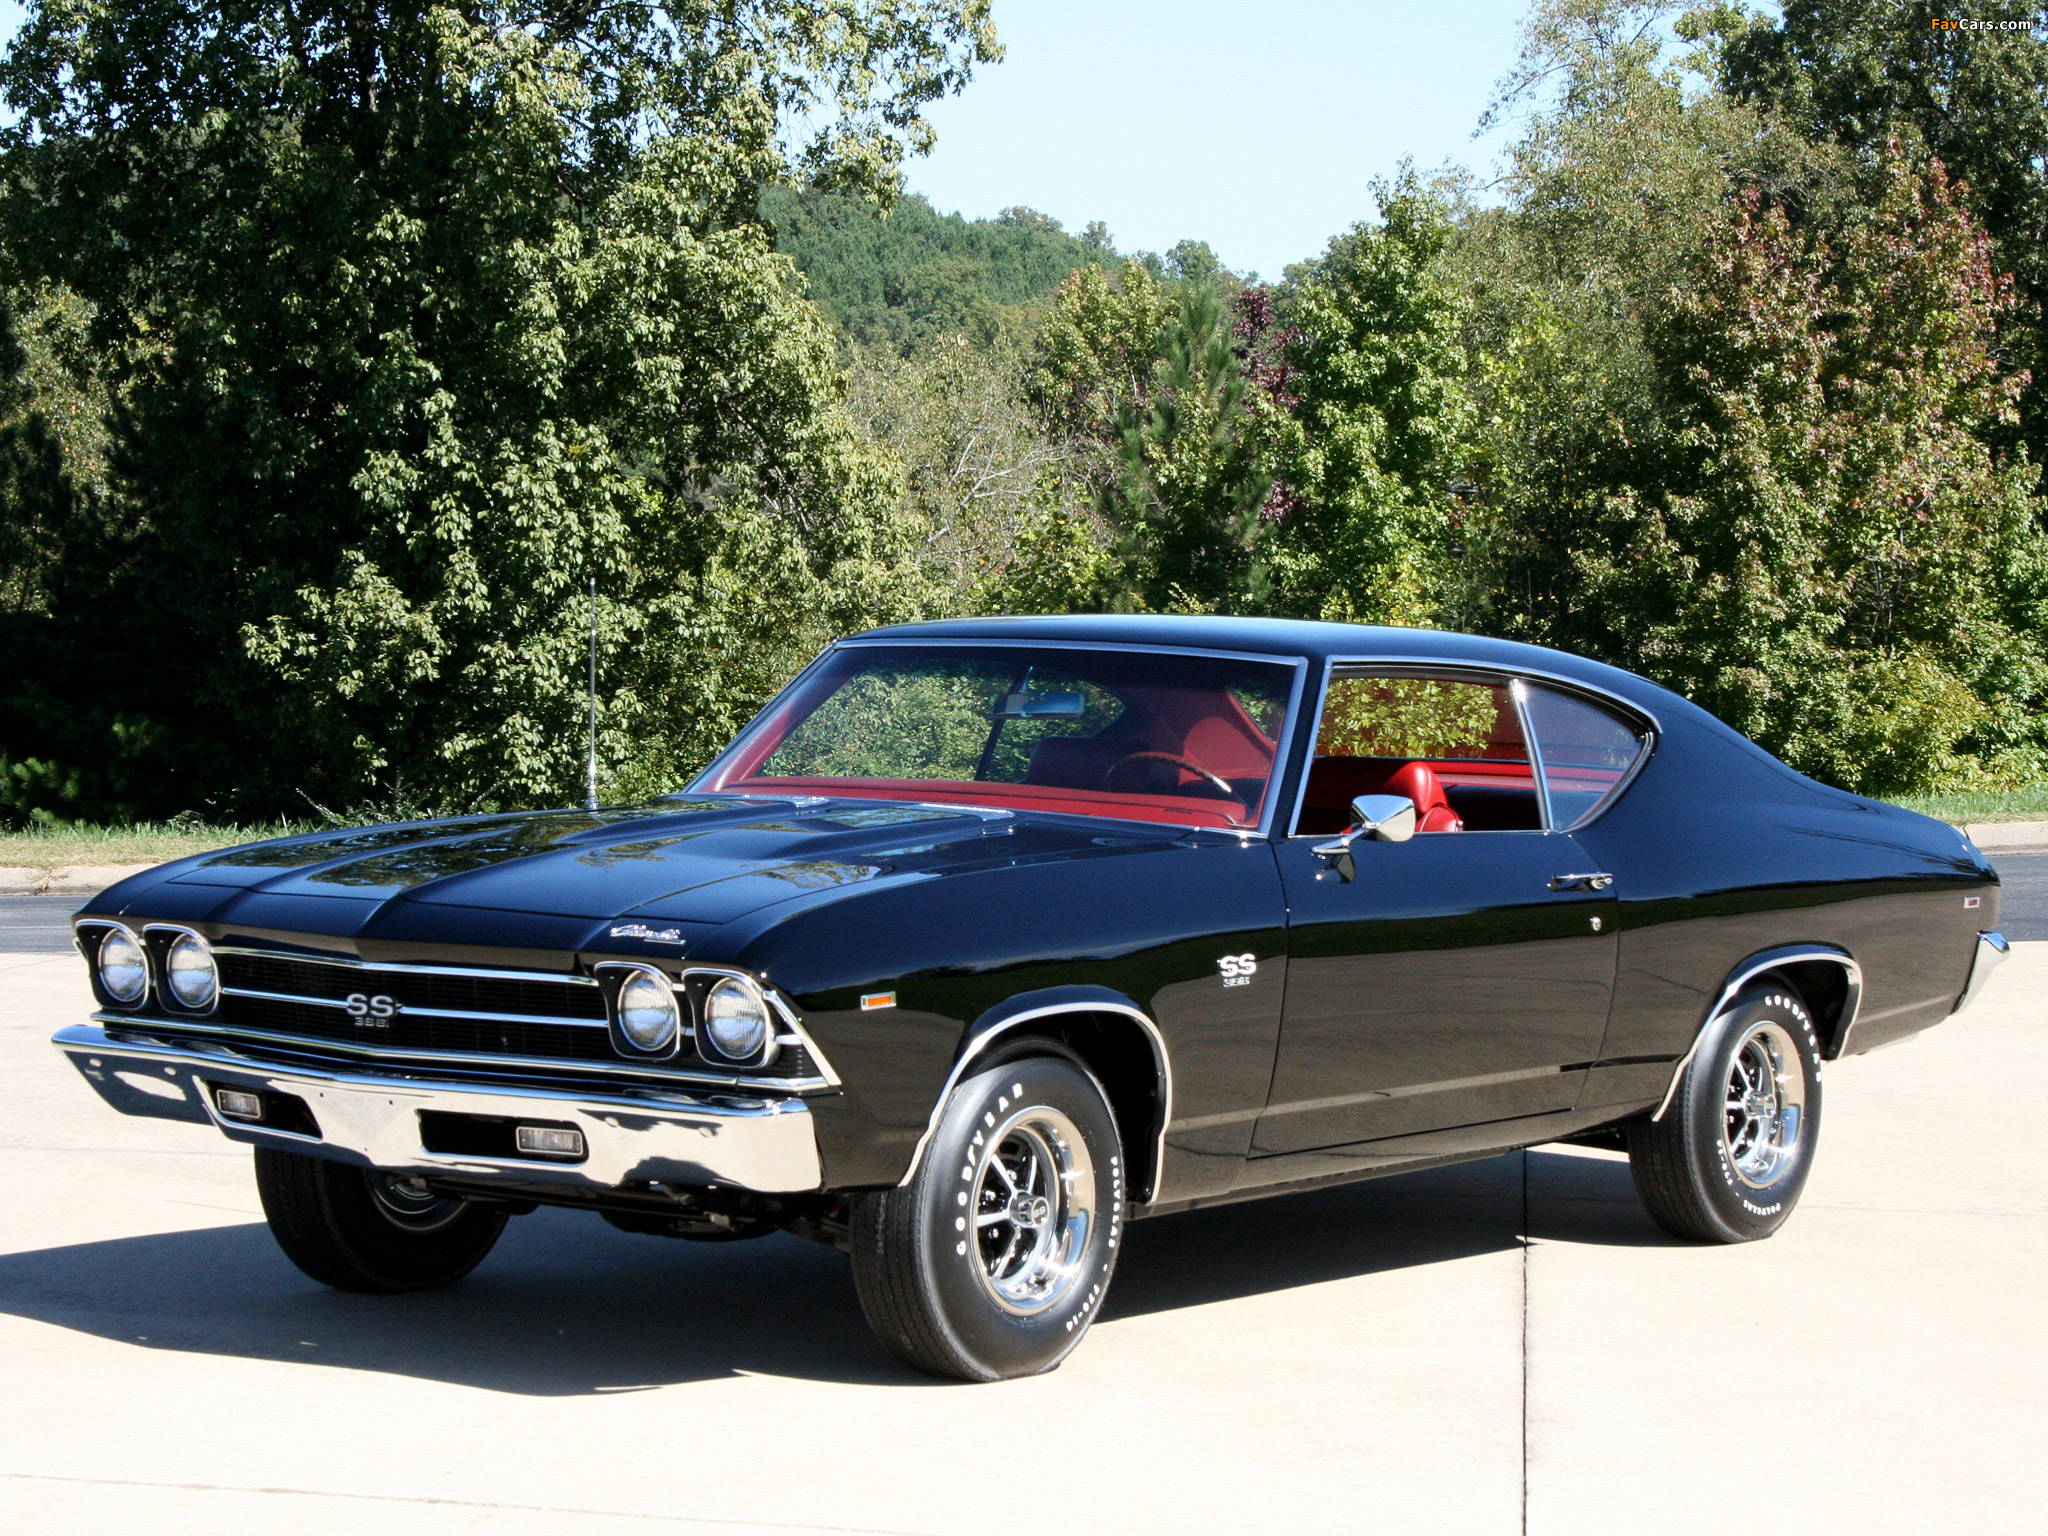 Wallpapers of Chevrolet Chevelle SS 396 Hardtop Coupe 1969 2048 x 2048x1536